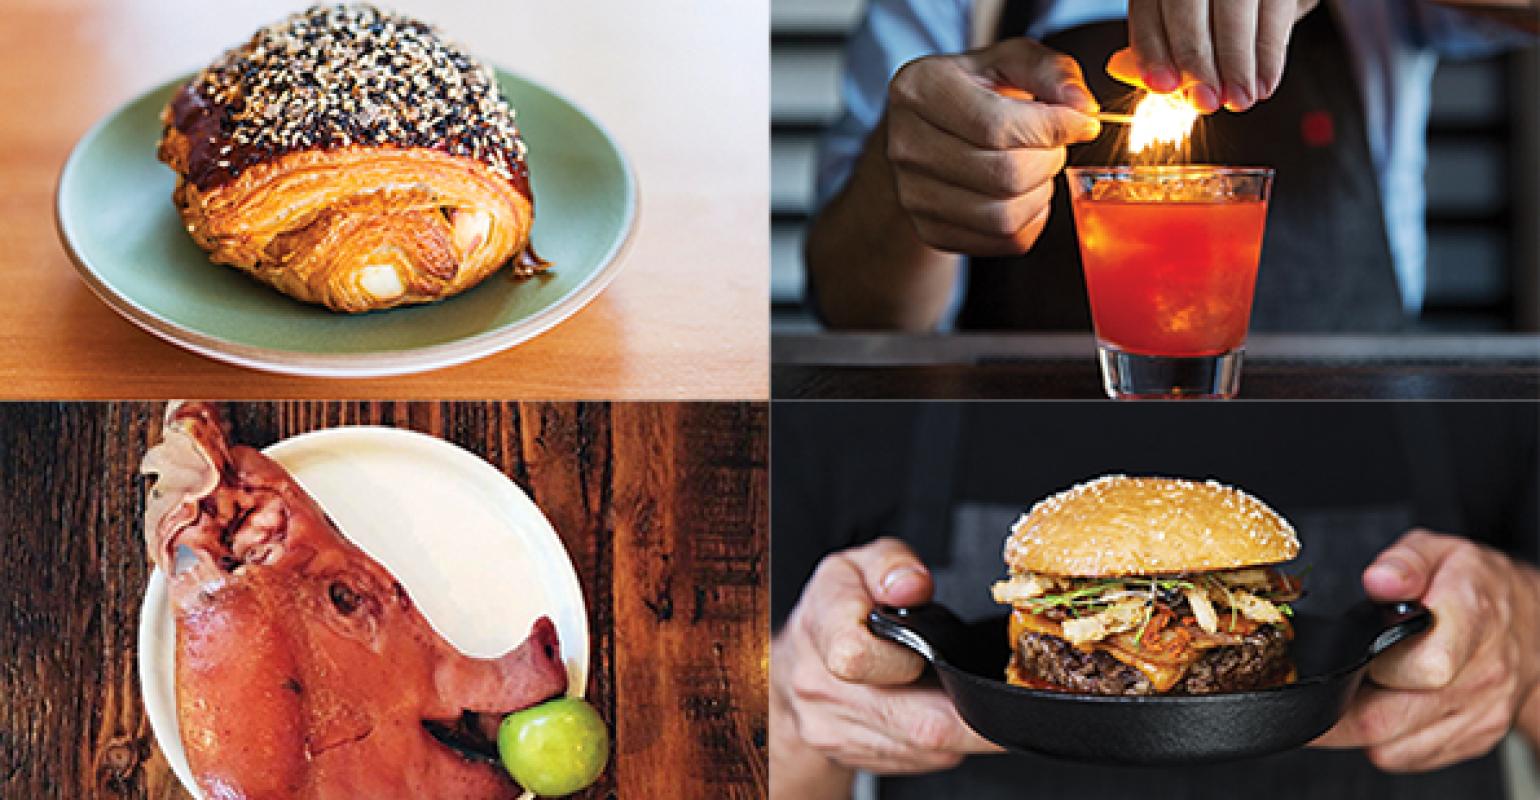 15 food trends that are cooking at restaurants in 2015 | Restaurant